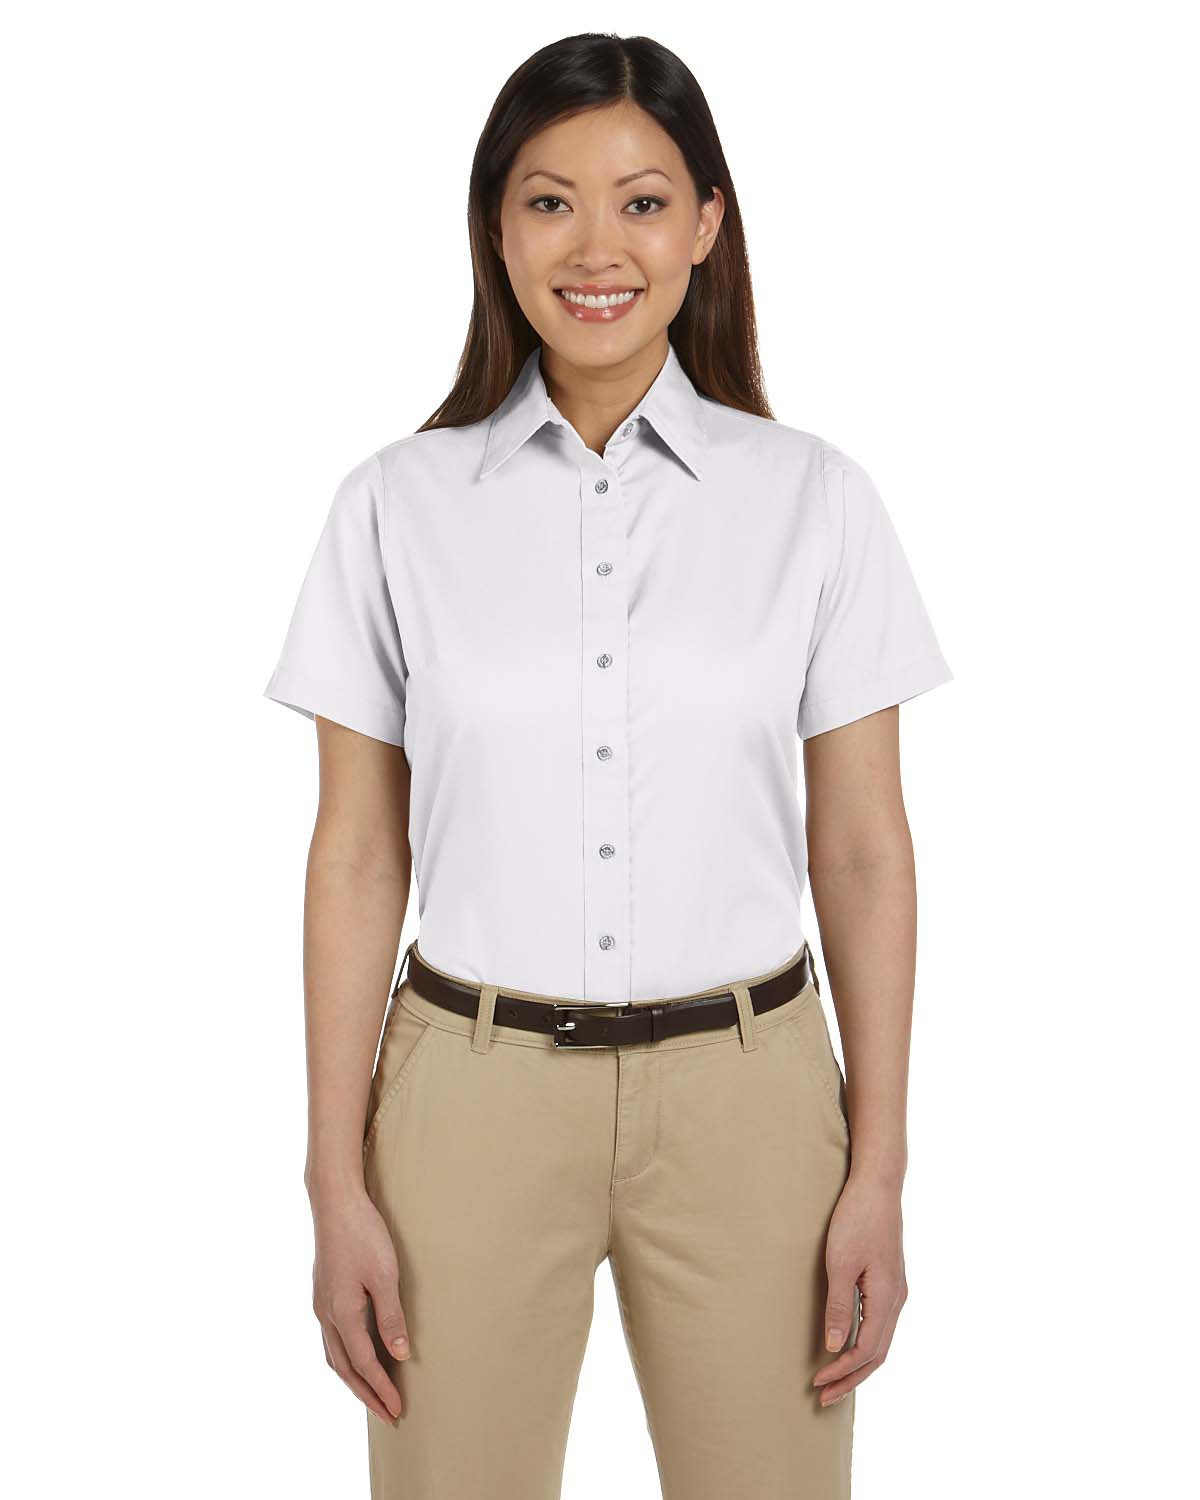 'Harriton M500SW Ladies Easy Blend Short-Sleeve Twill Shirt with Stain-Release'